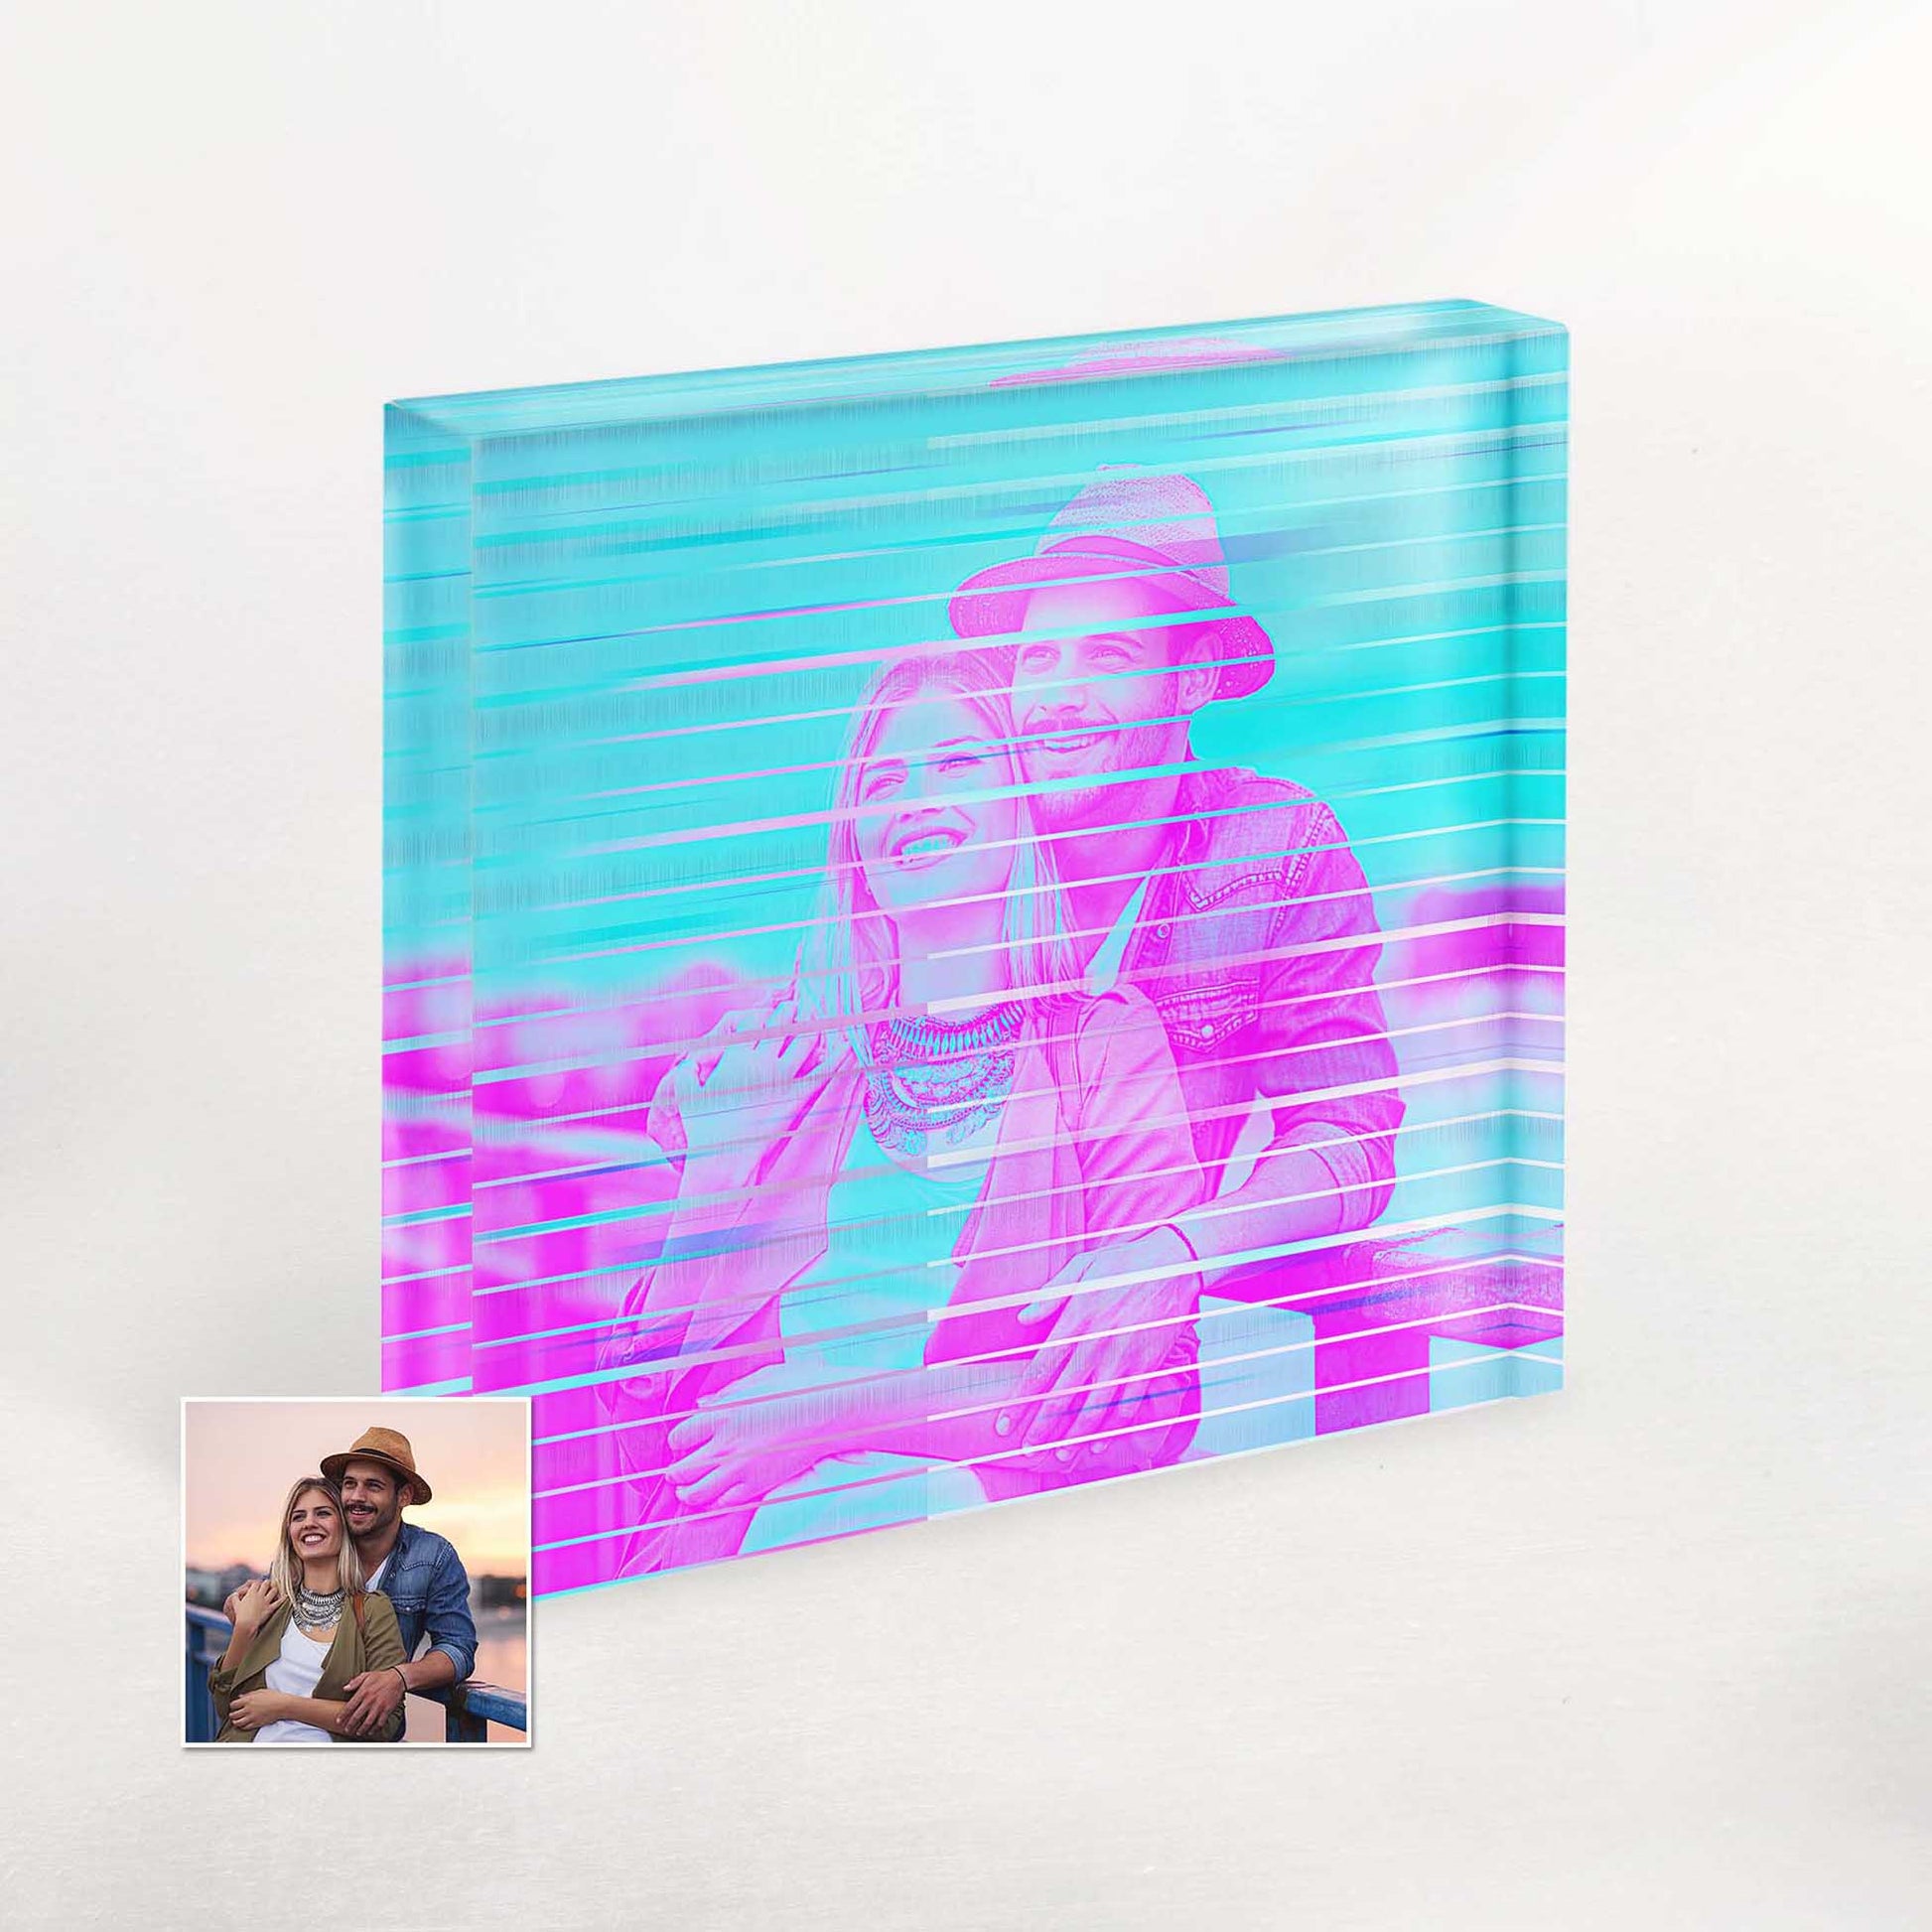 Trendy and Stylish: Personalised Purple and Blue Signal Acrylic Block Photo. Celebrate birthdays or anniversaries with a cool and creative gift. Our customised acrylic block photos add a modern touch to any space.